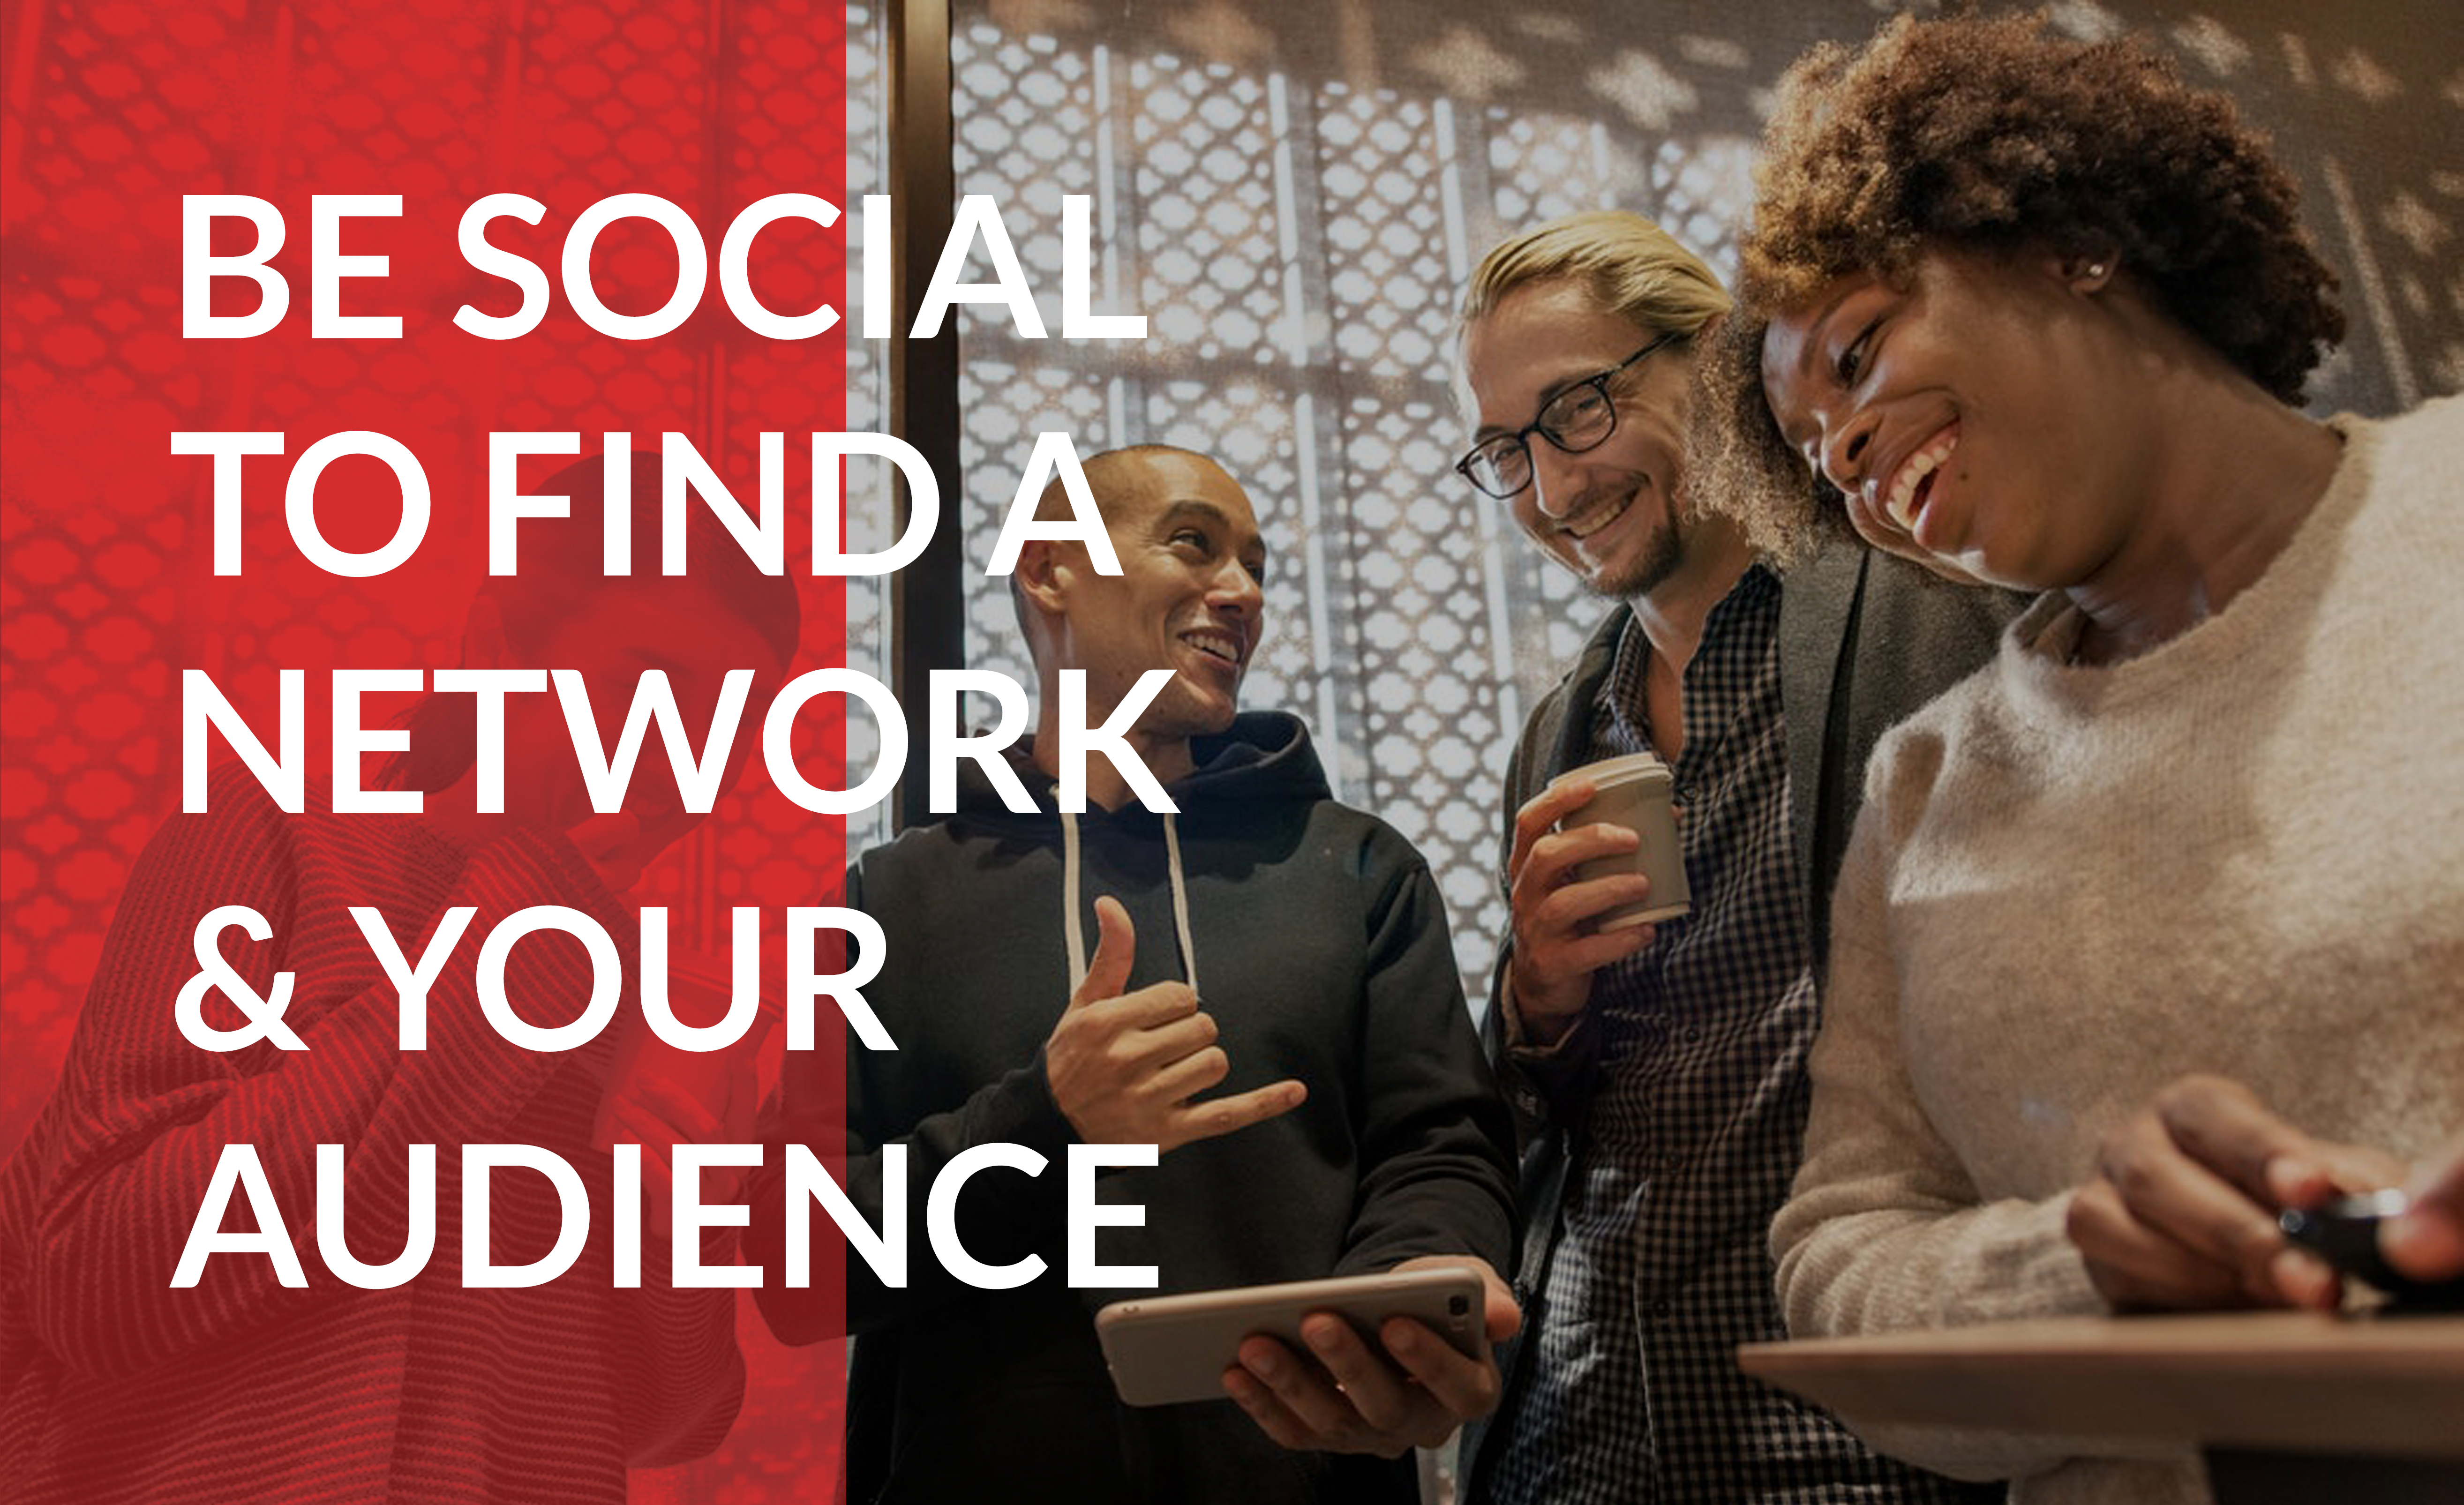 Be social online and offline to build a network of partners and customers.